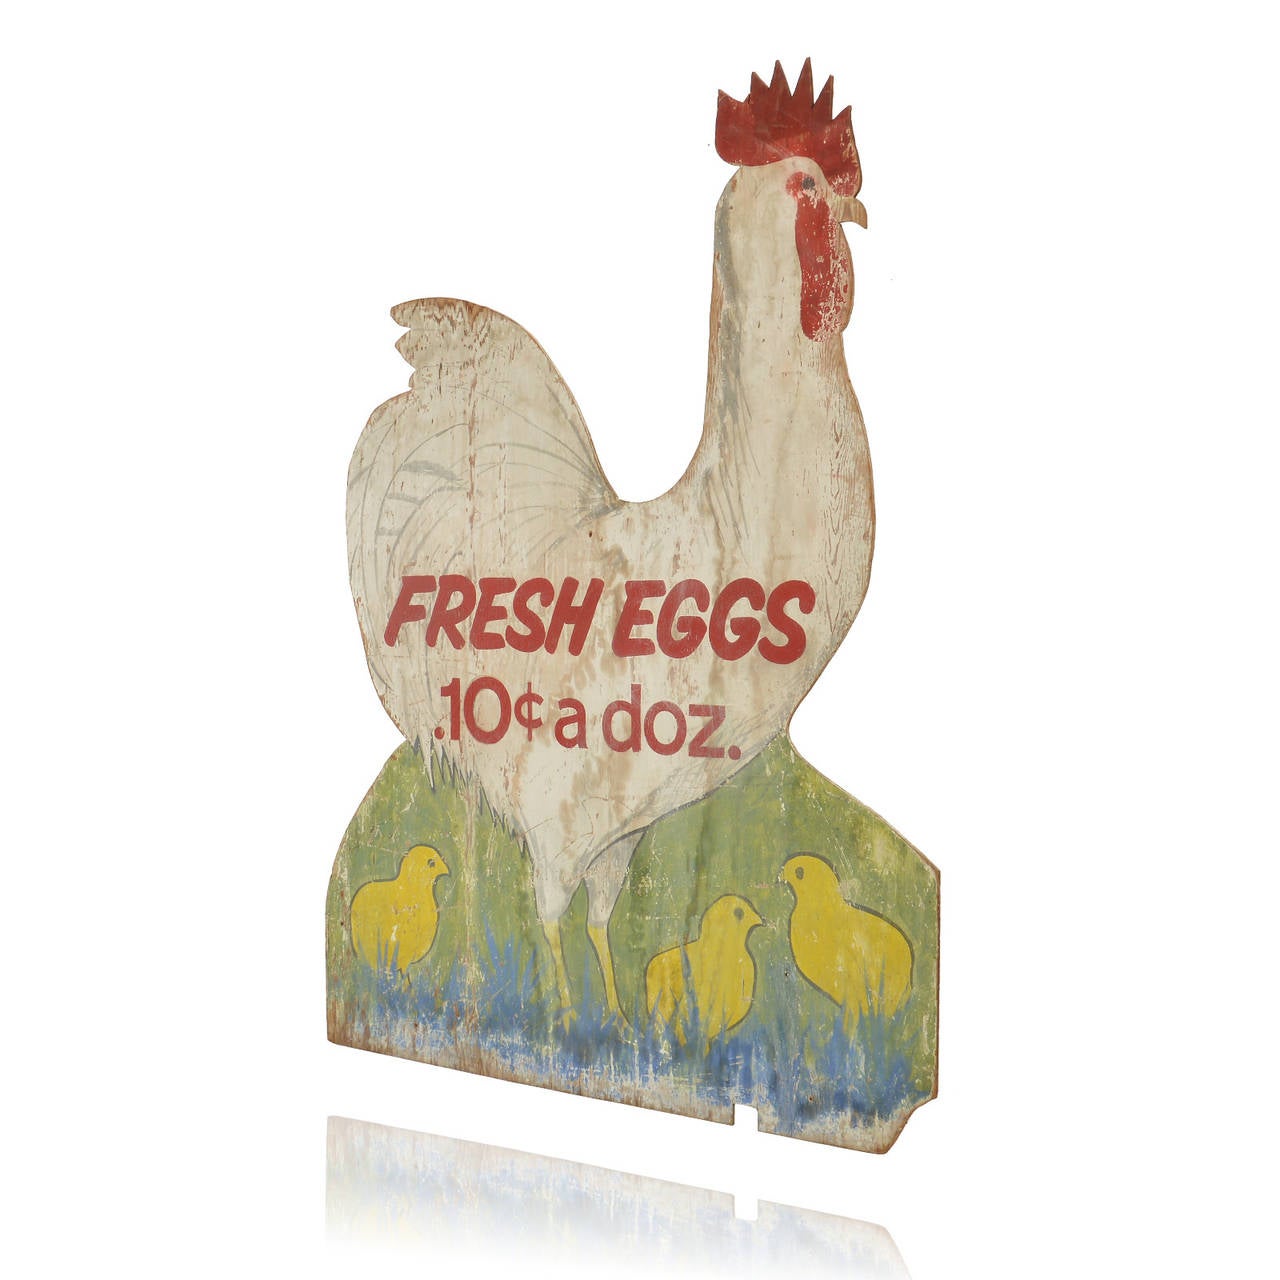 This antique wood sign advertises Fresh Eggs for 10 cents a dozen, I wonder what year that was? Late 1800's or early 1900's? What ever year it was, it's in very nice condition for a wood sign. Beautifully handpainted, the double sided  sign depicts